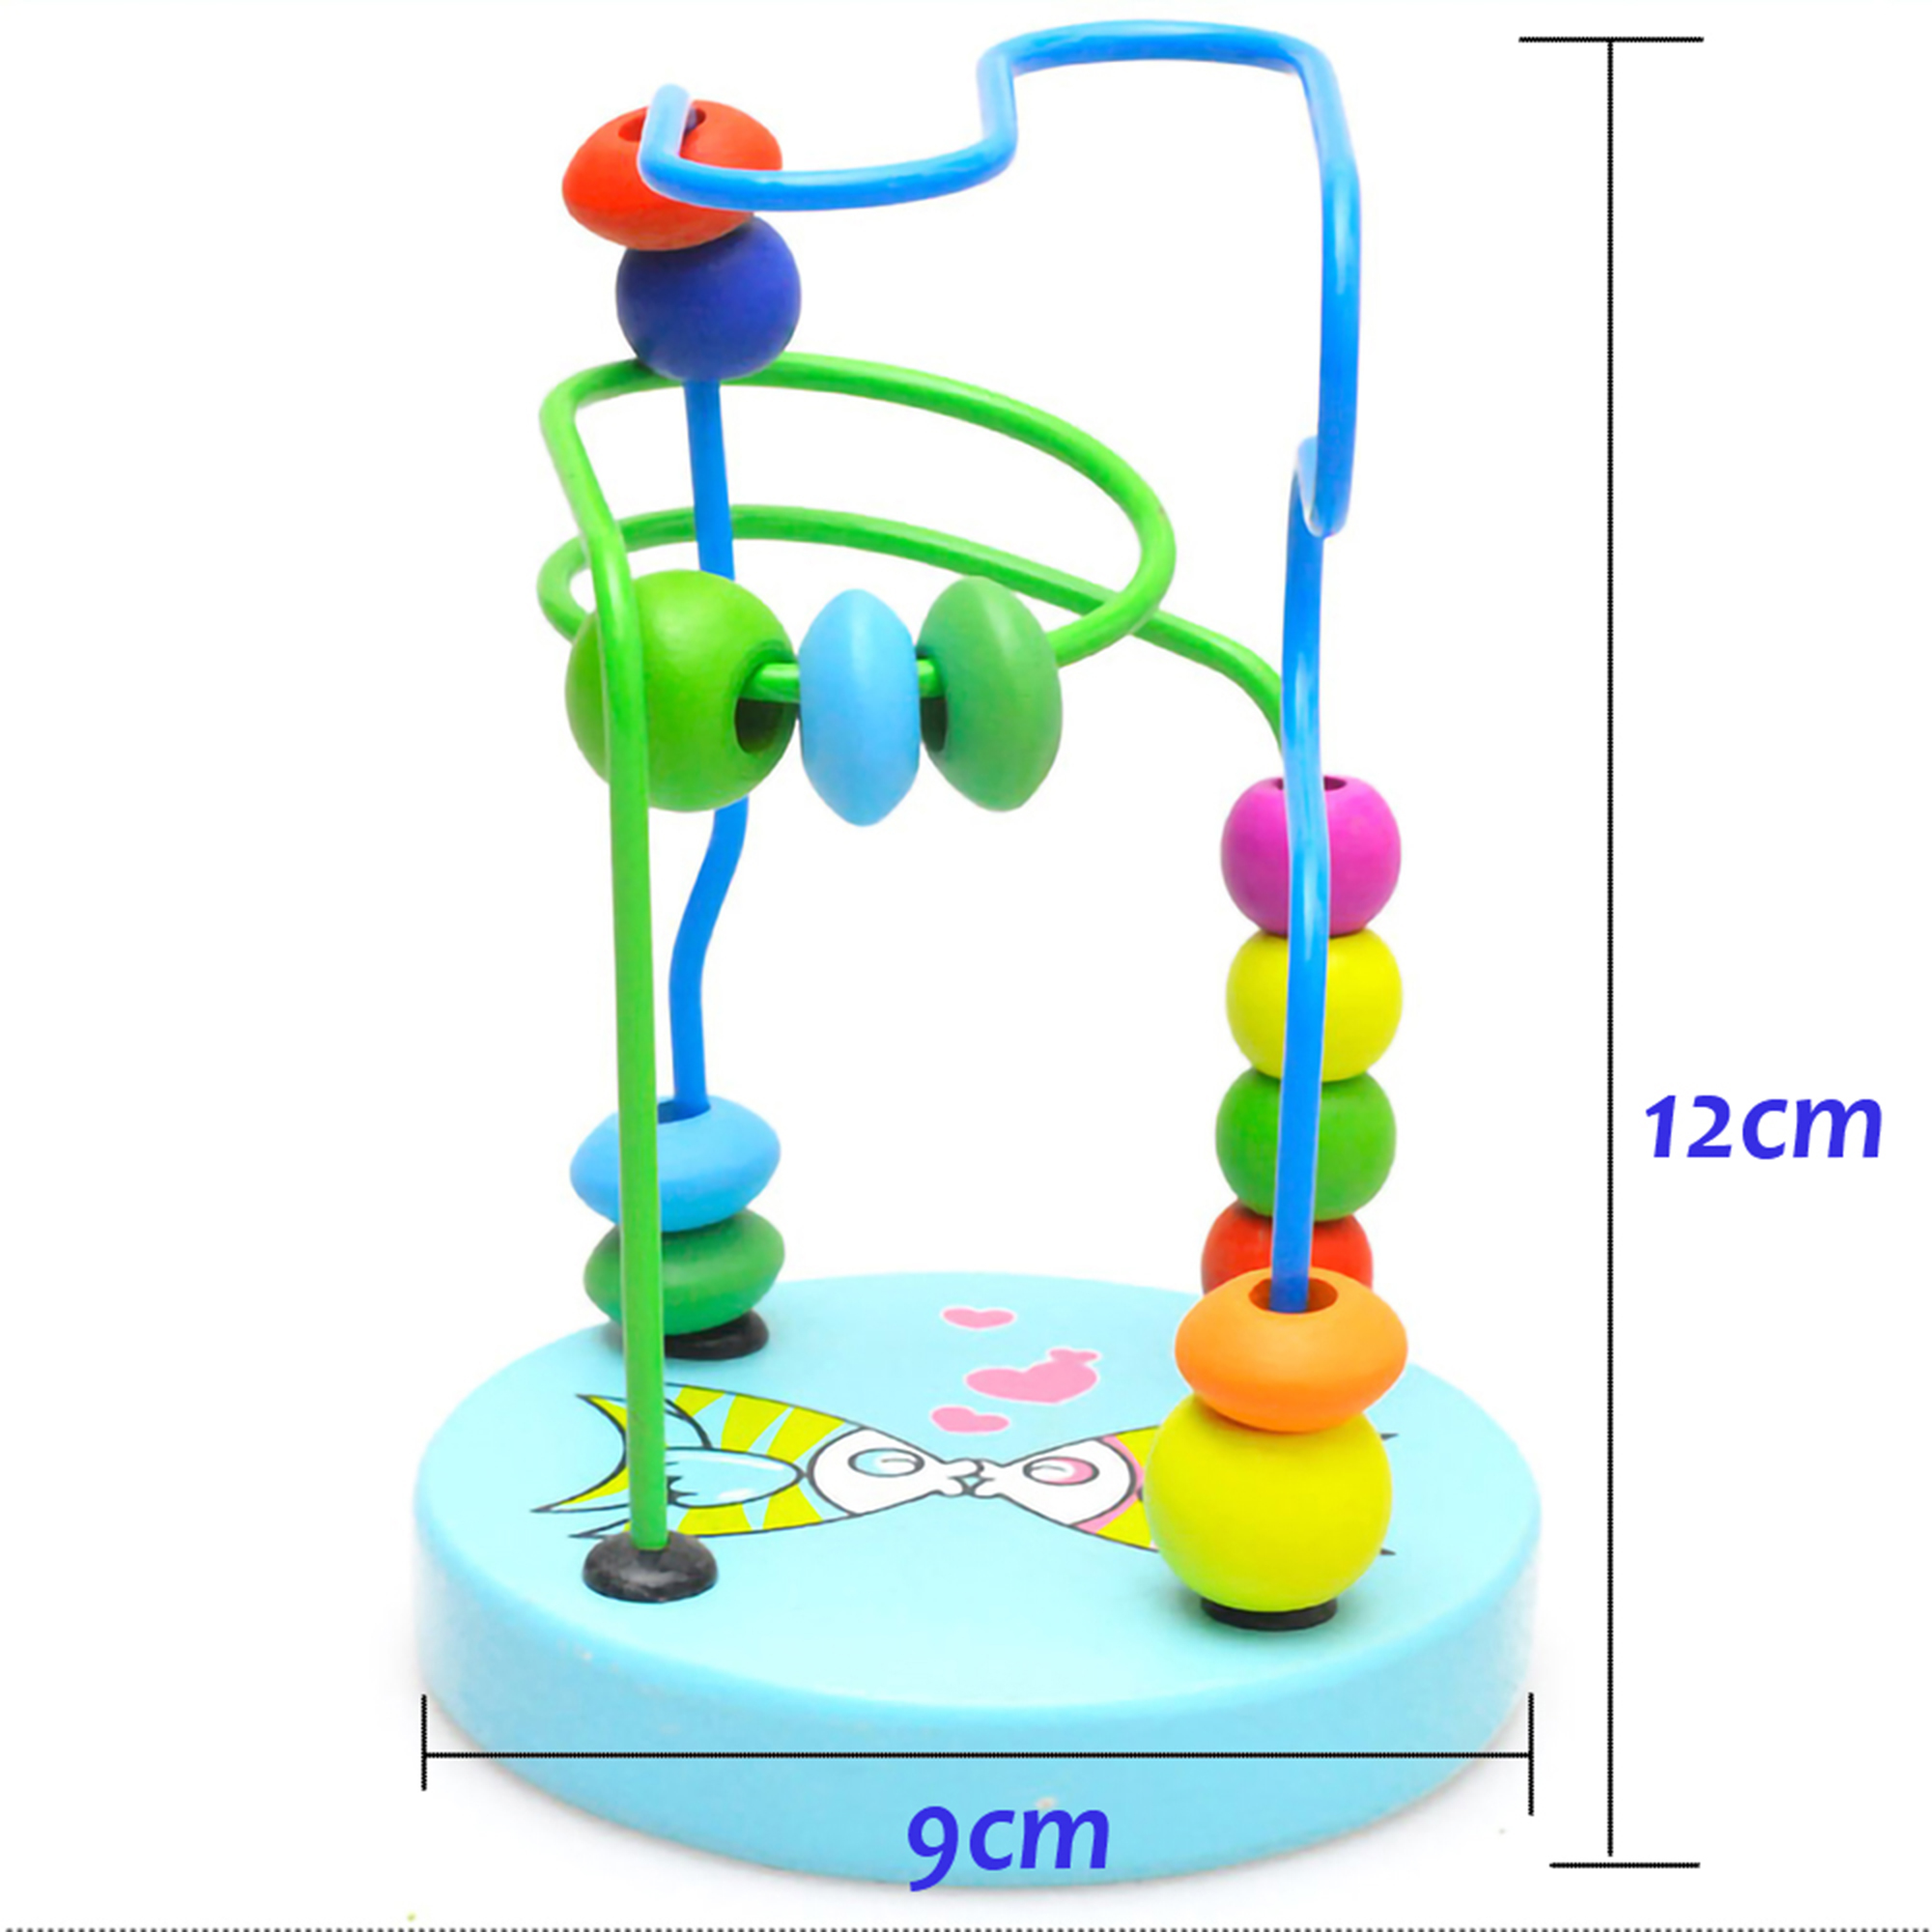 Wire Maze Roller Coaster for Toddlers Toy Gift Child Kids Colorful Wooden Mini Around Bead Educational Game Toy for Kids Sliding Beads On Twists Wire - image 2 of 6